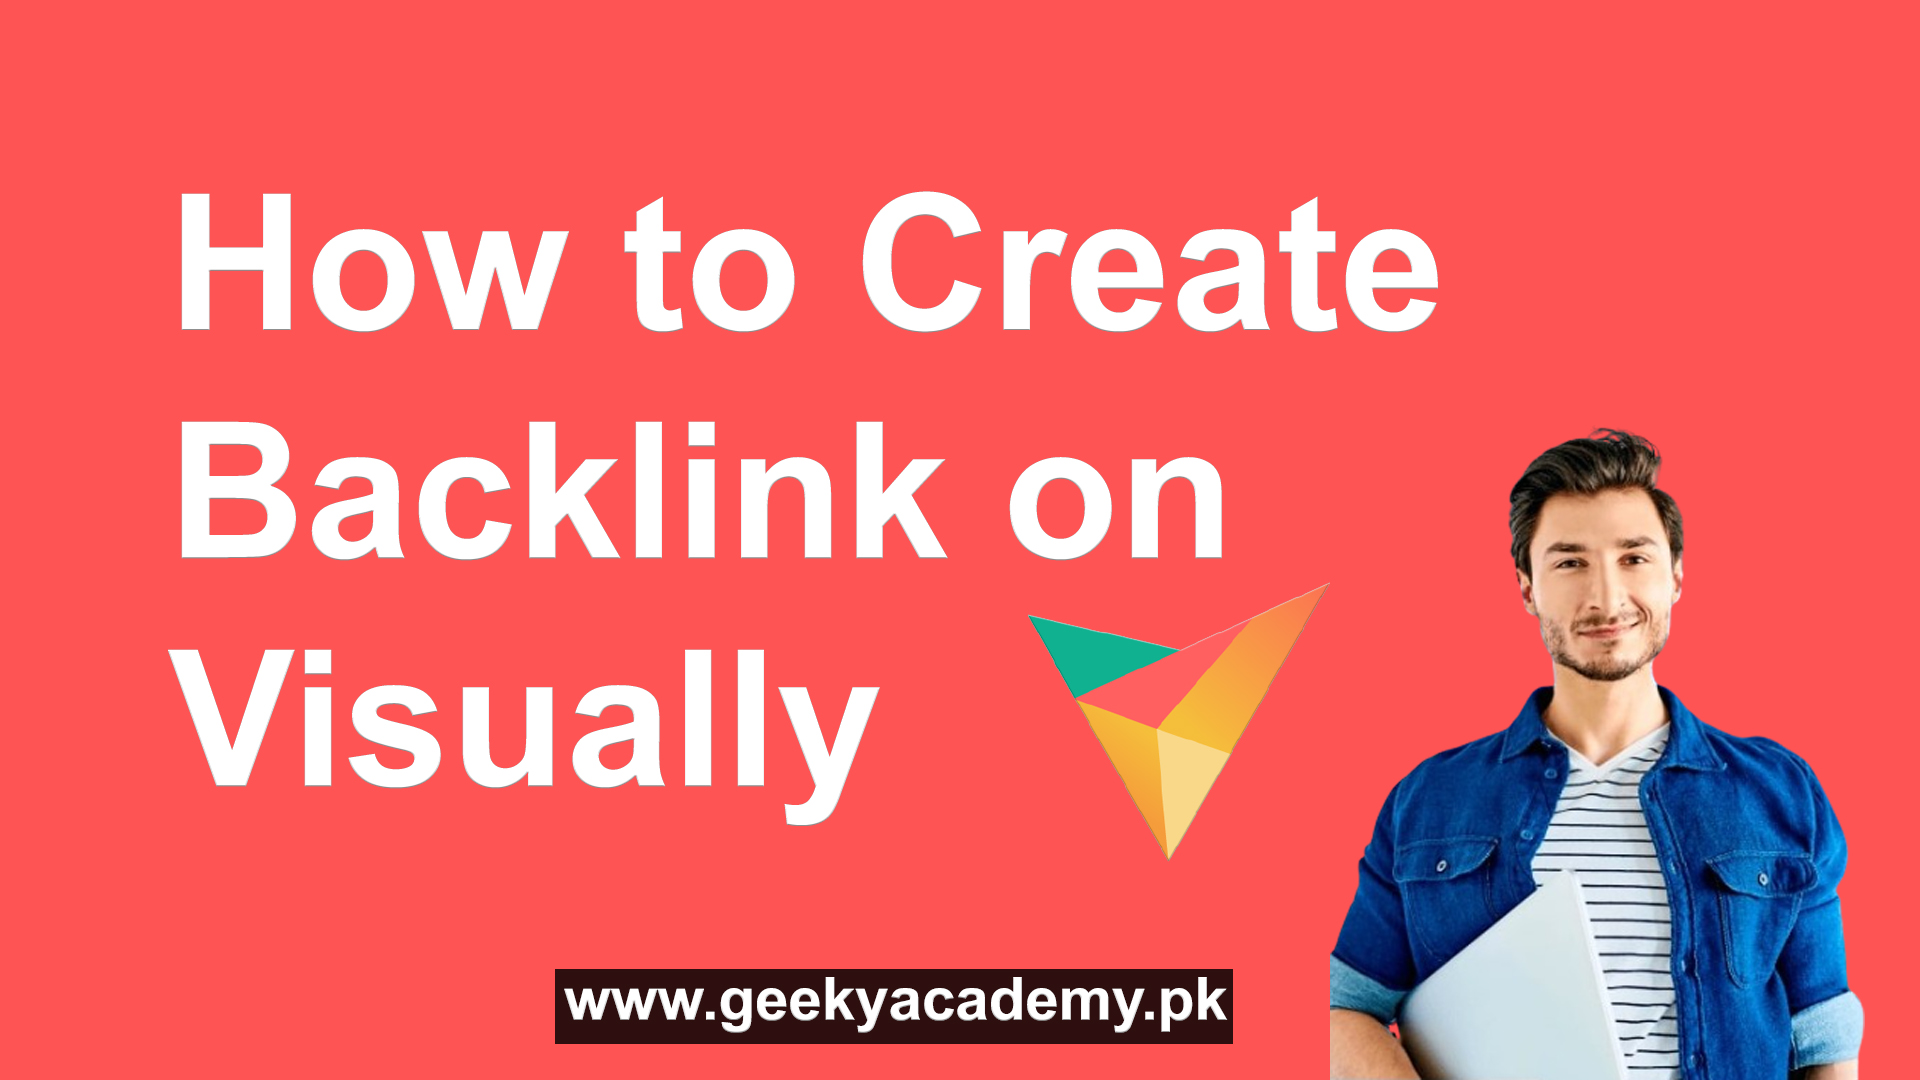 How to Create Backlink on Visually